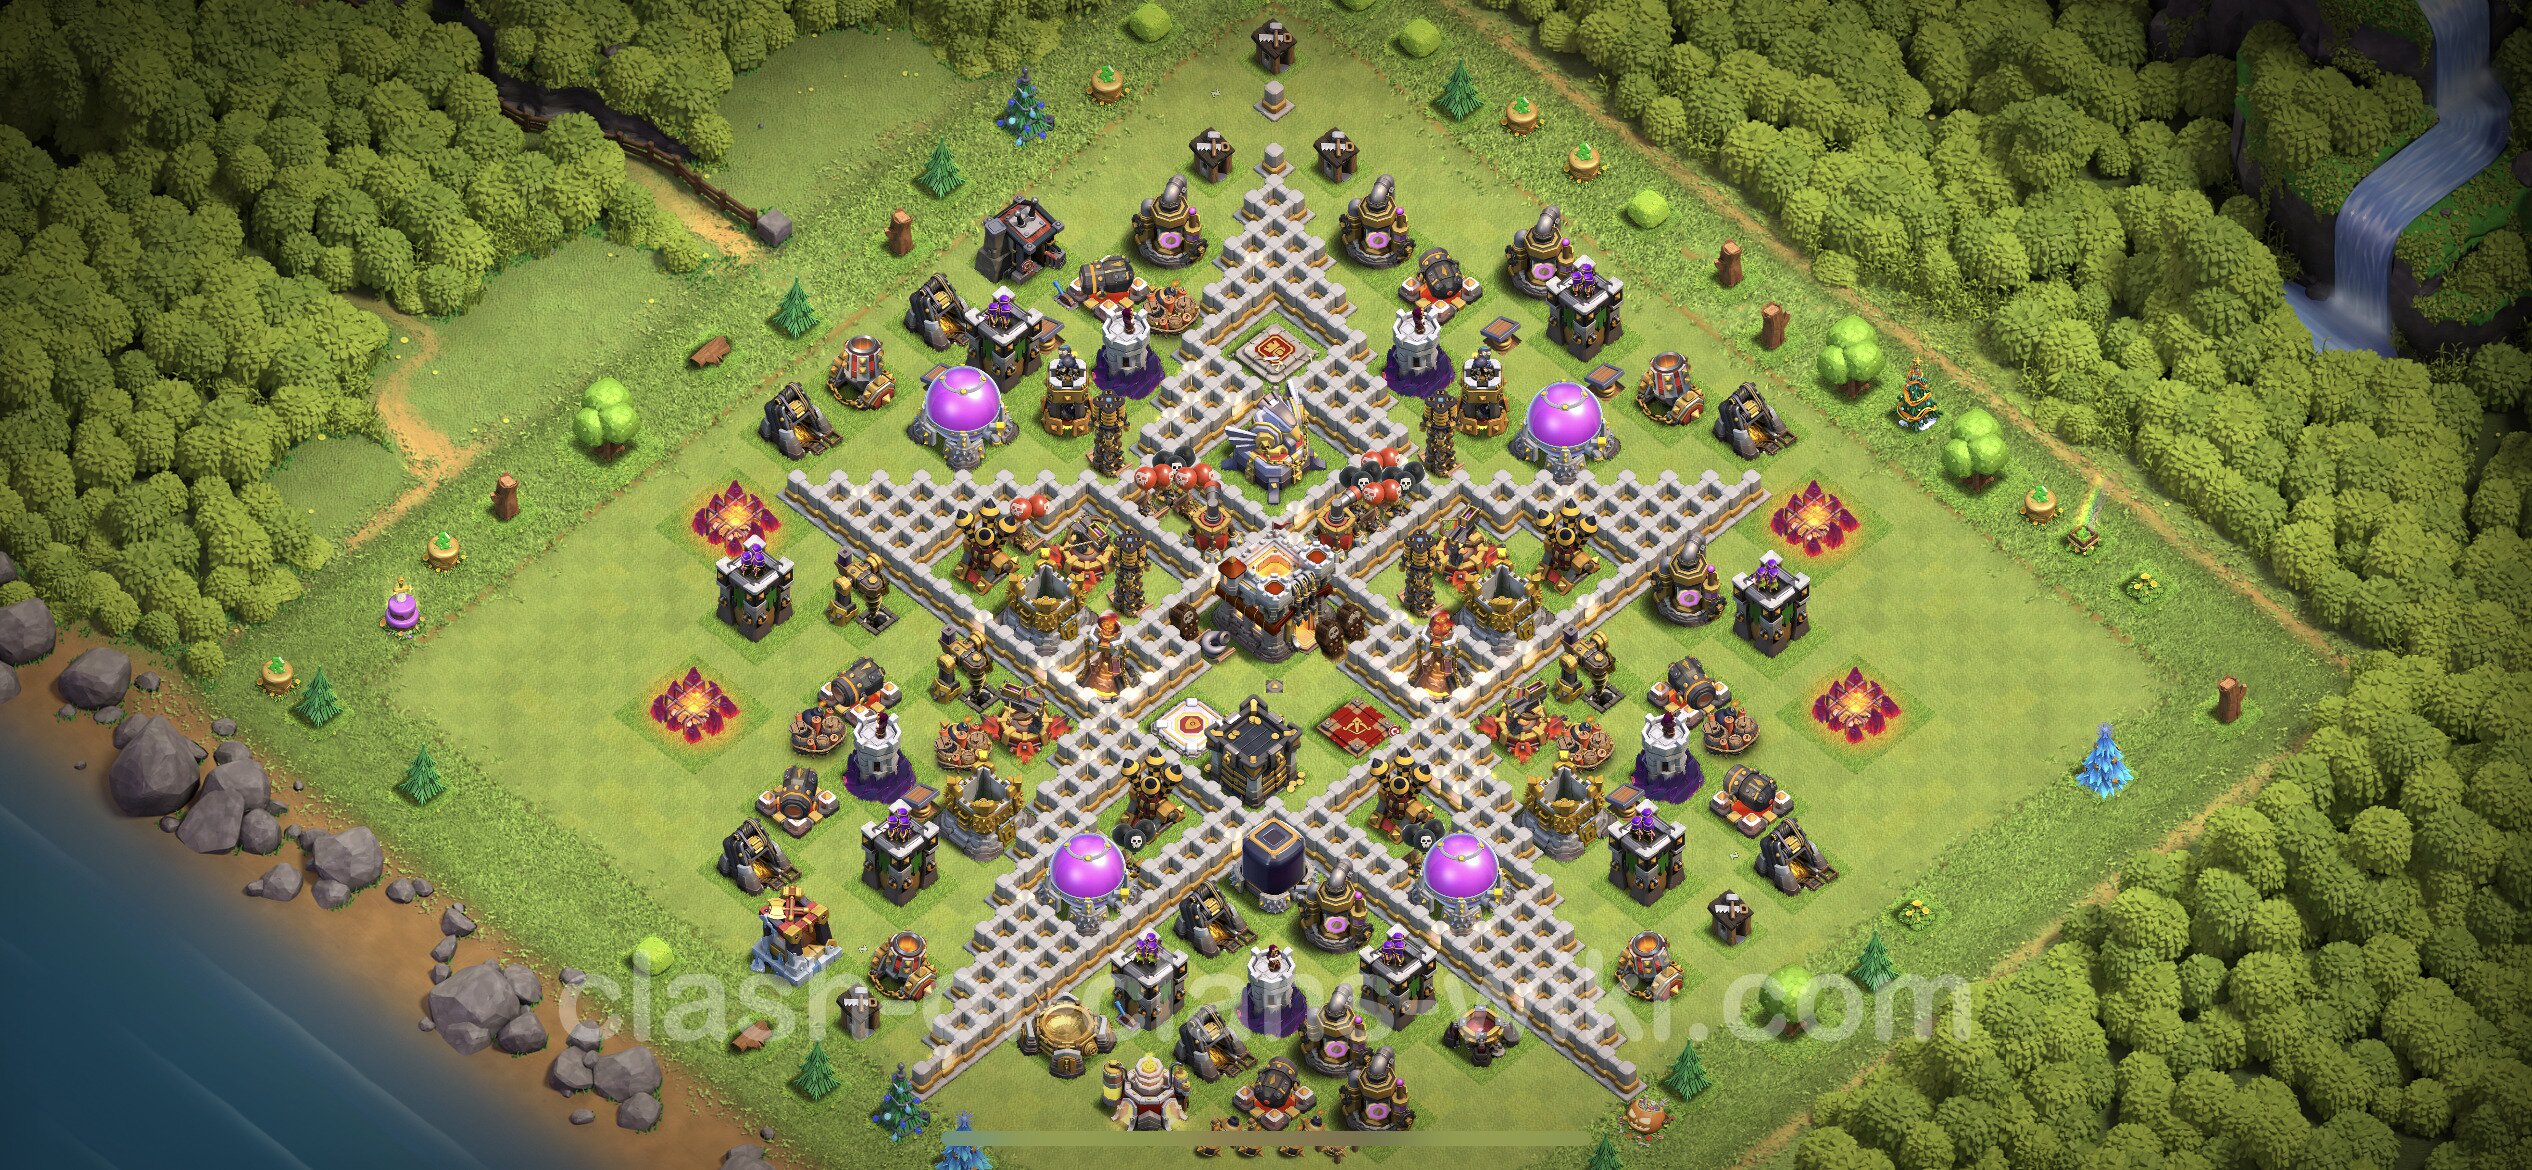 Funny Troll Base TH11 with Link - Town Hall Level 11 Art Base Copy, #2